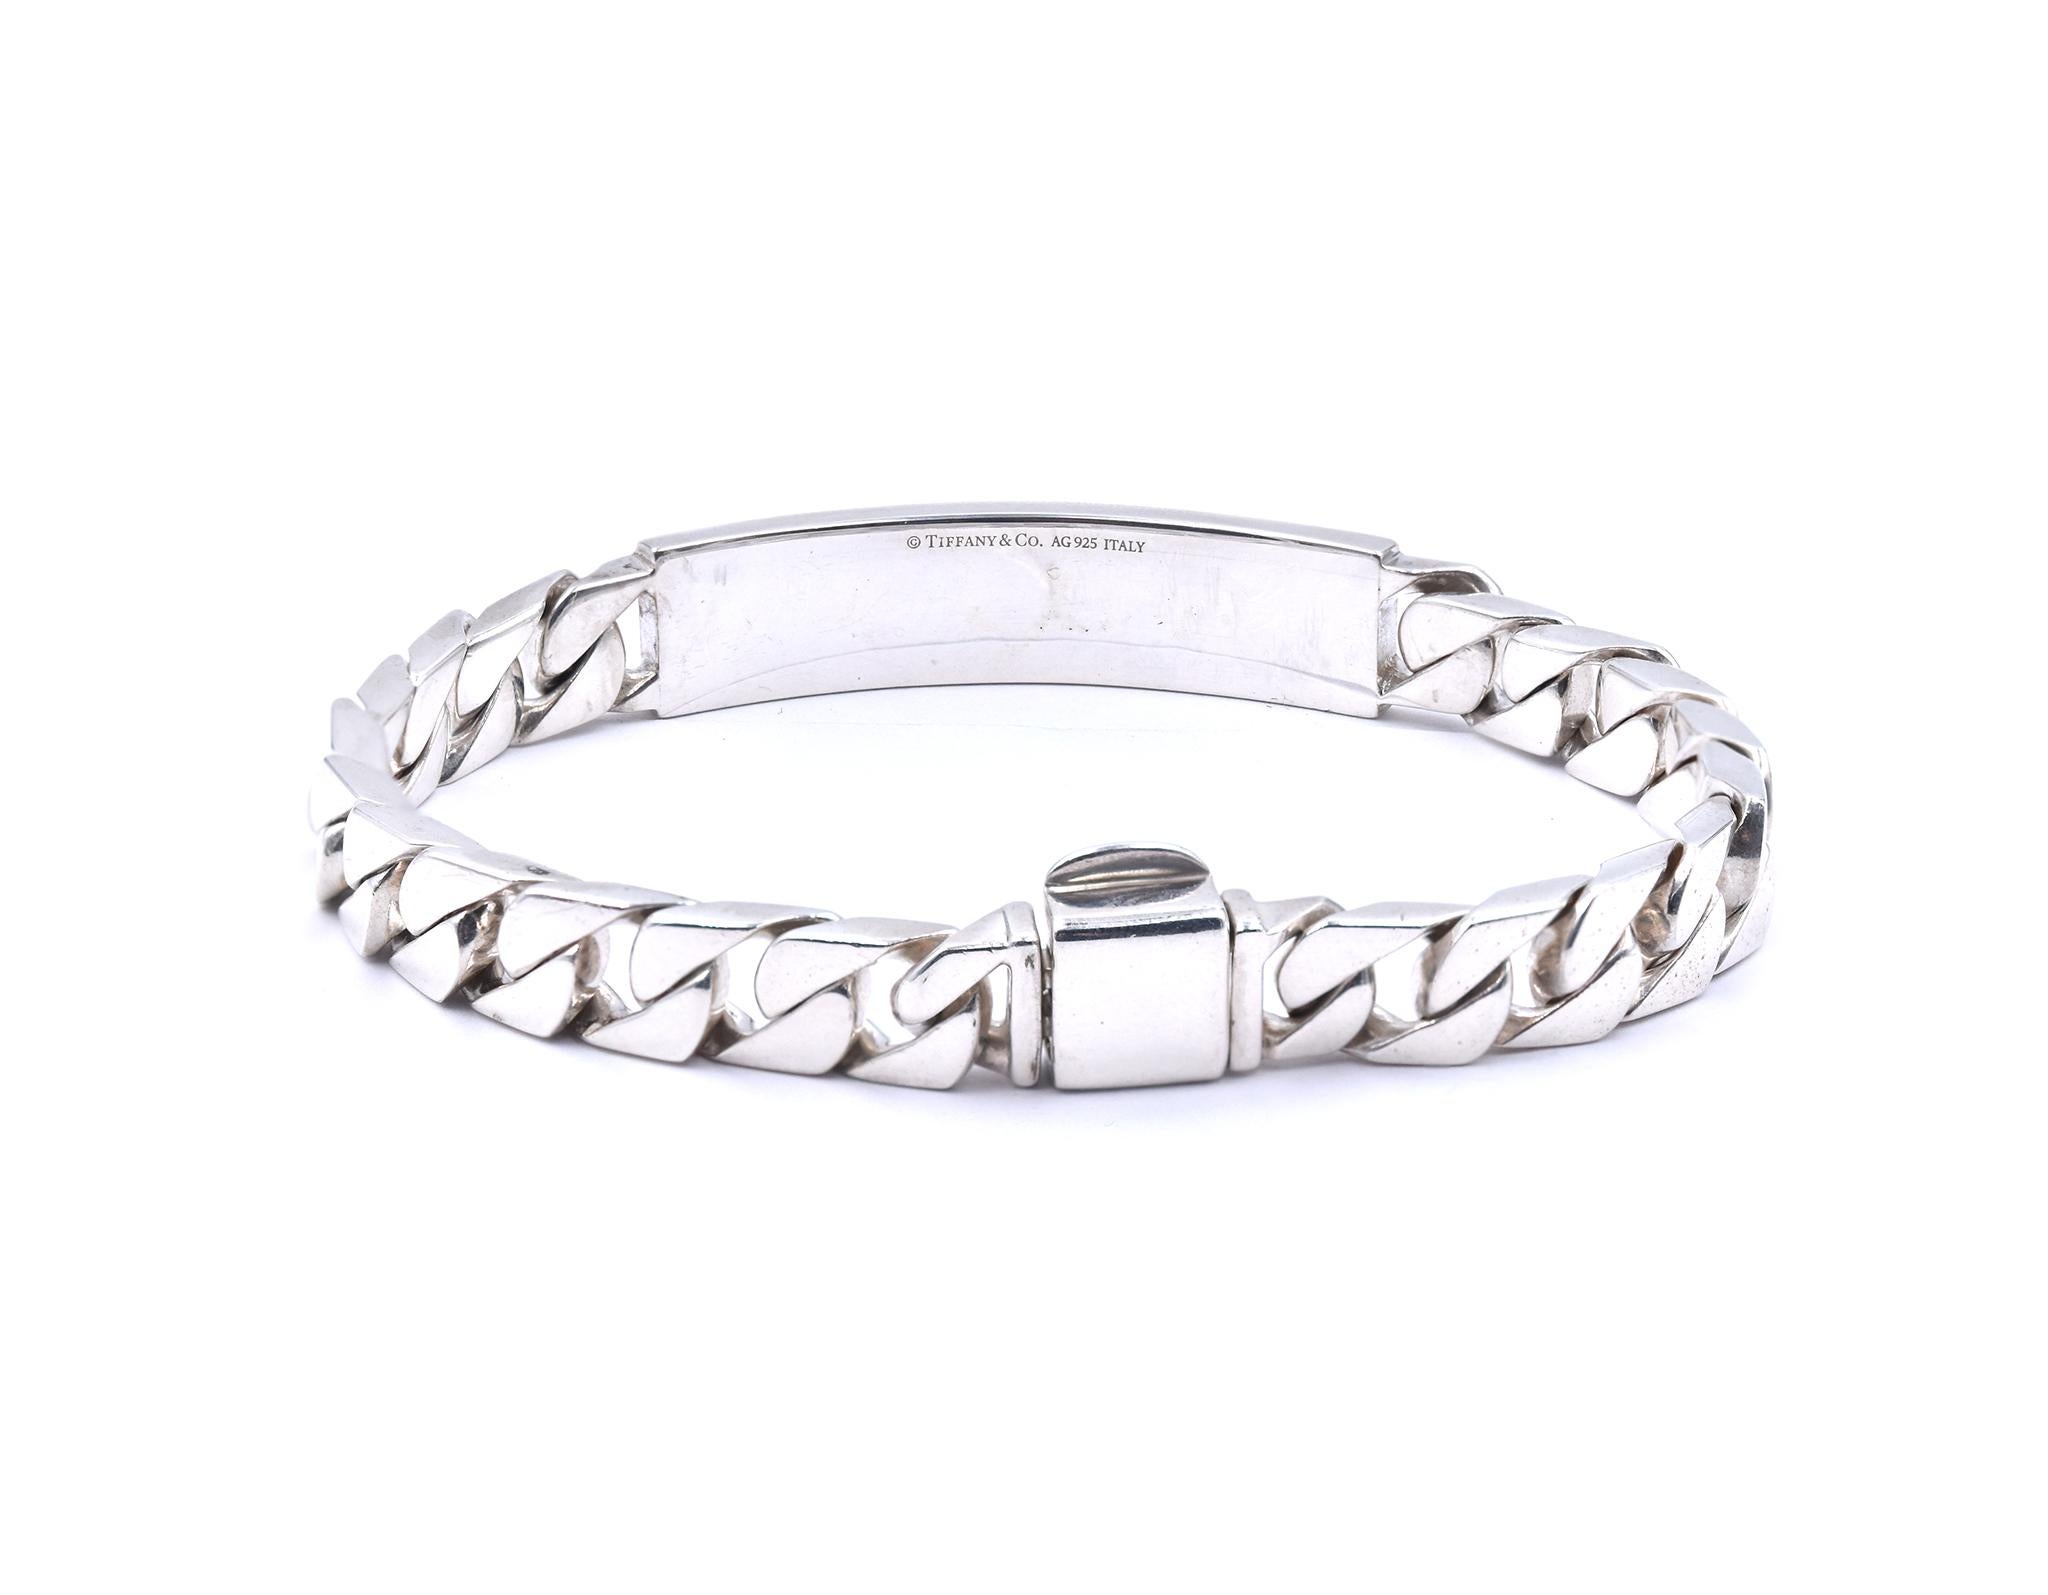 Women's Tiffany & Co. Sterling Silver ID Bracelet Engraved “Just You & Me”